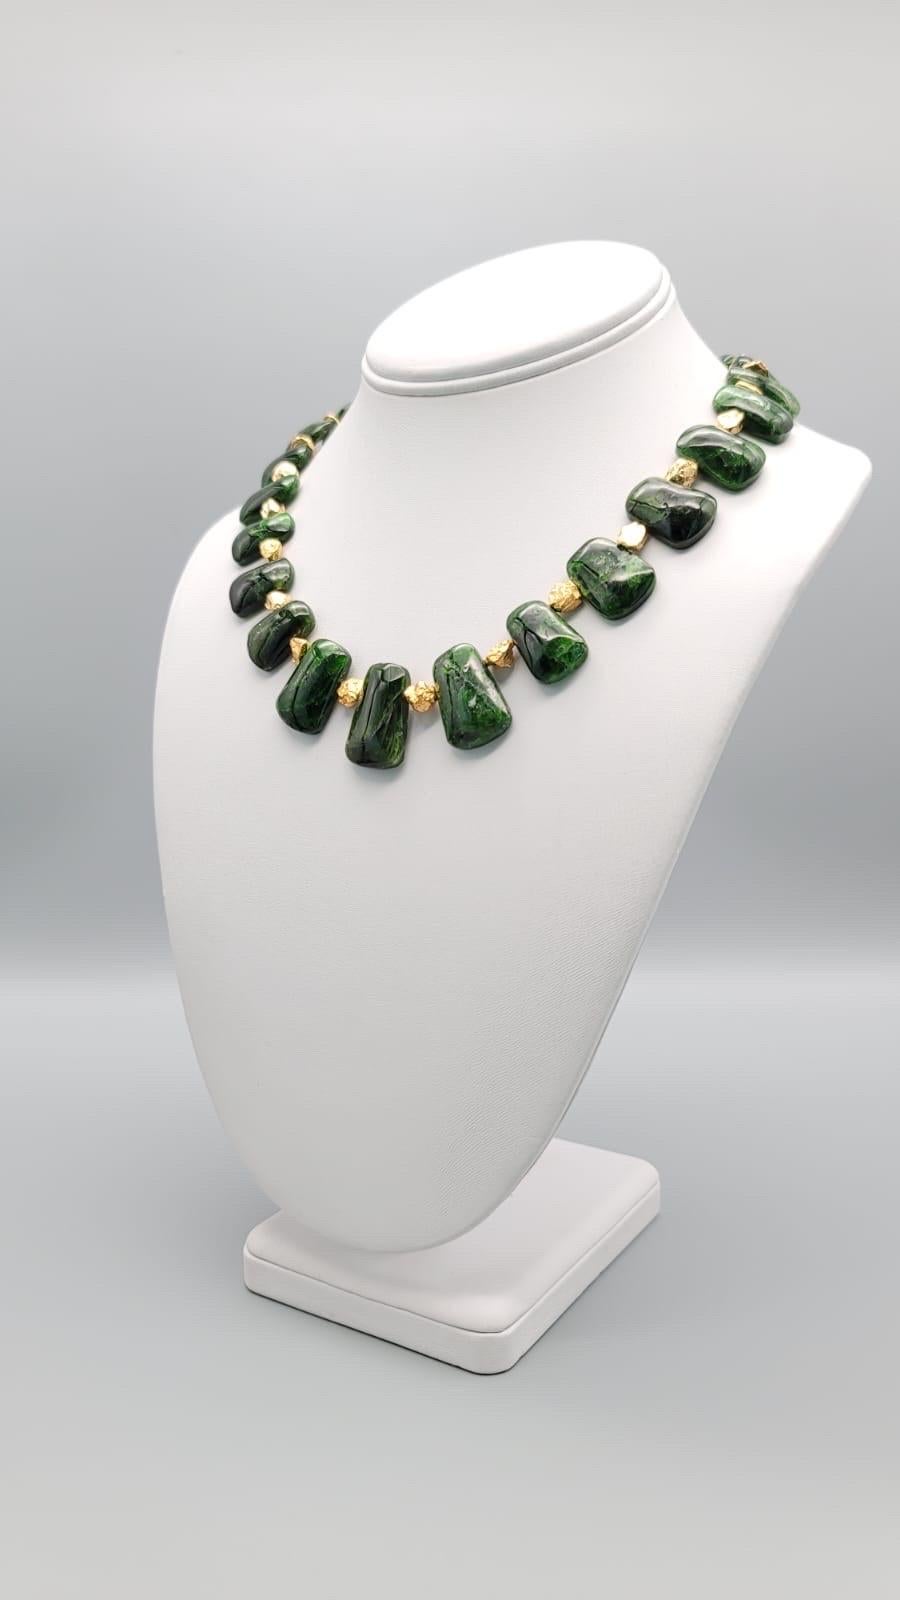 A.Jeschel Richly colored Chrome Diopside necklace 8